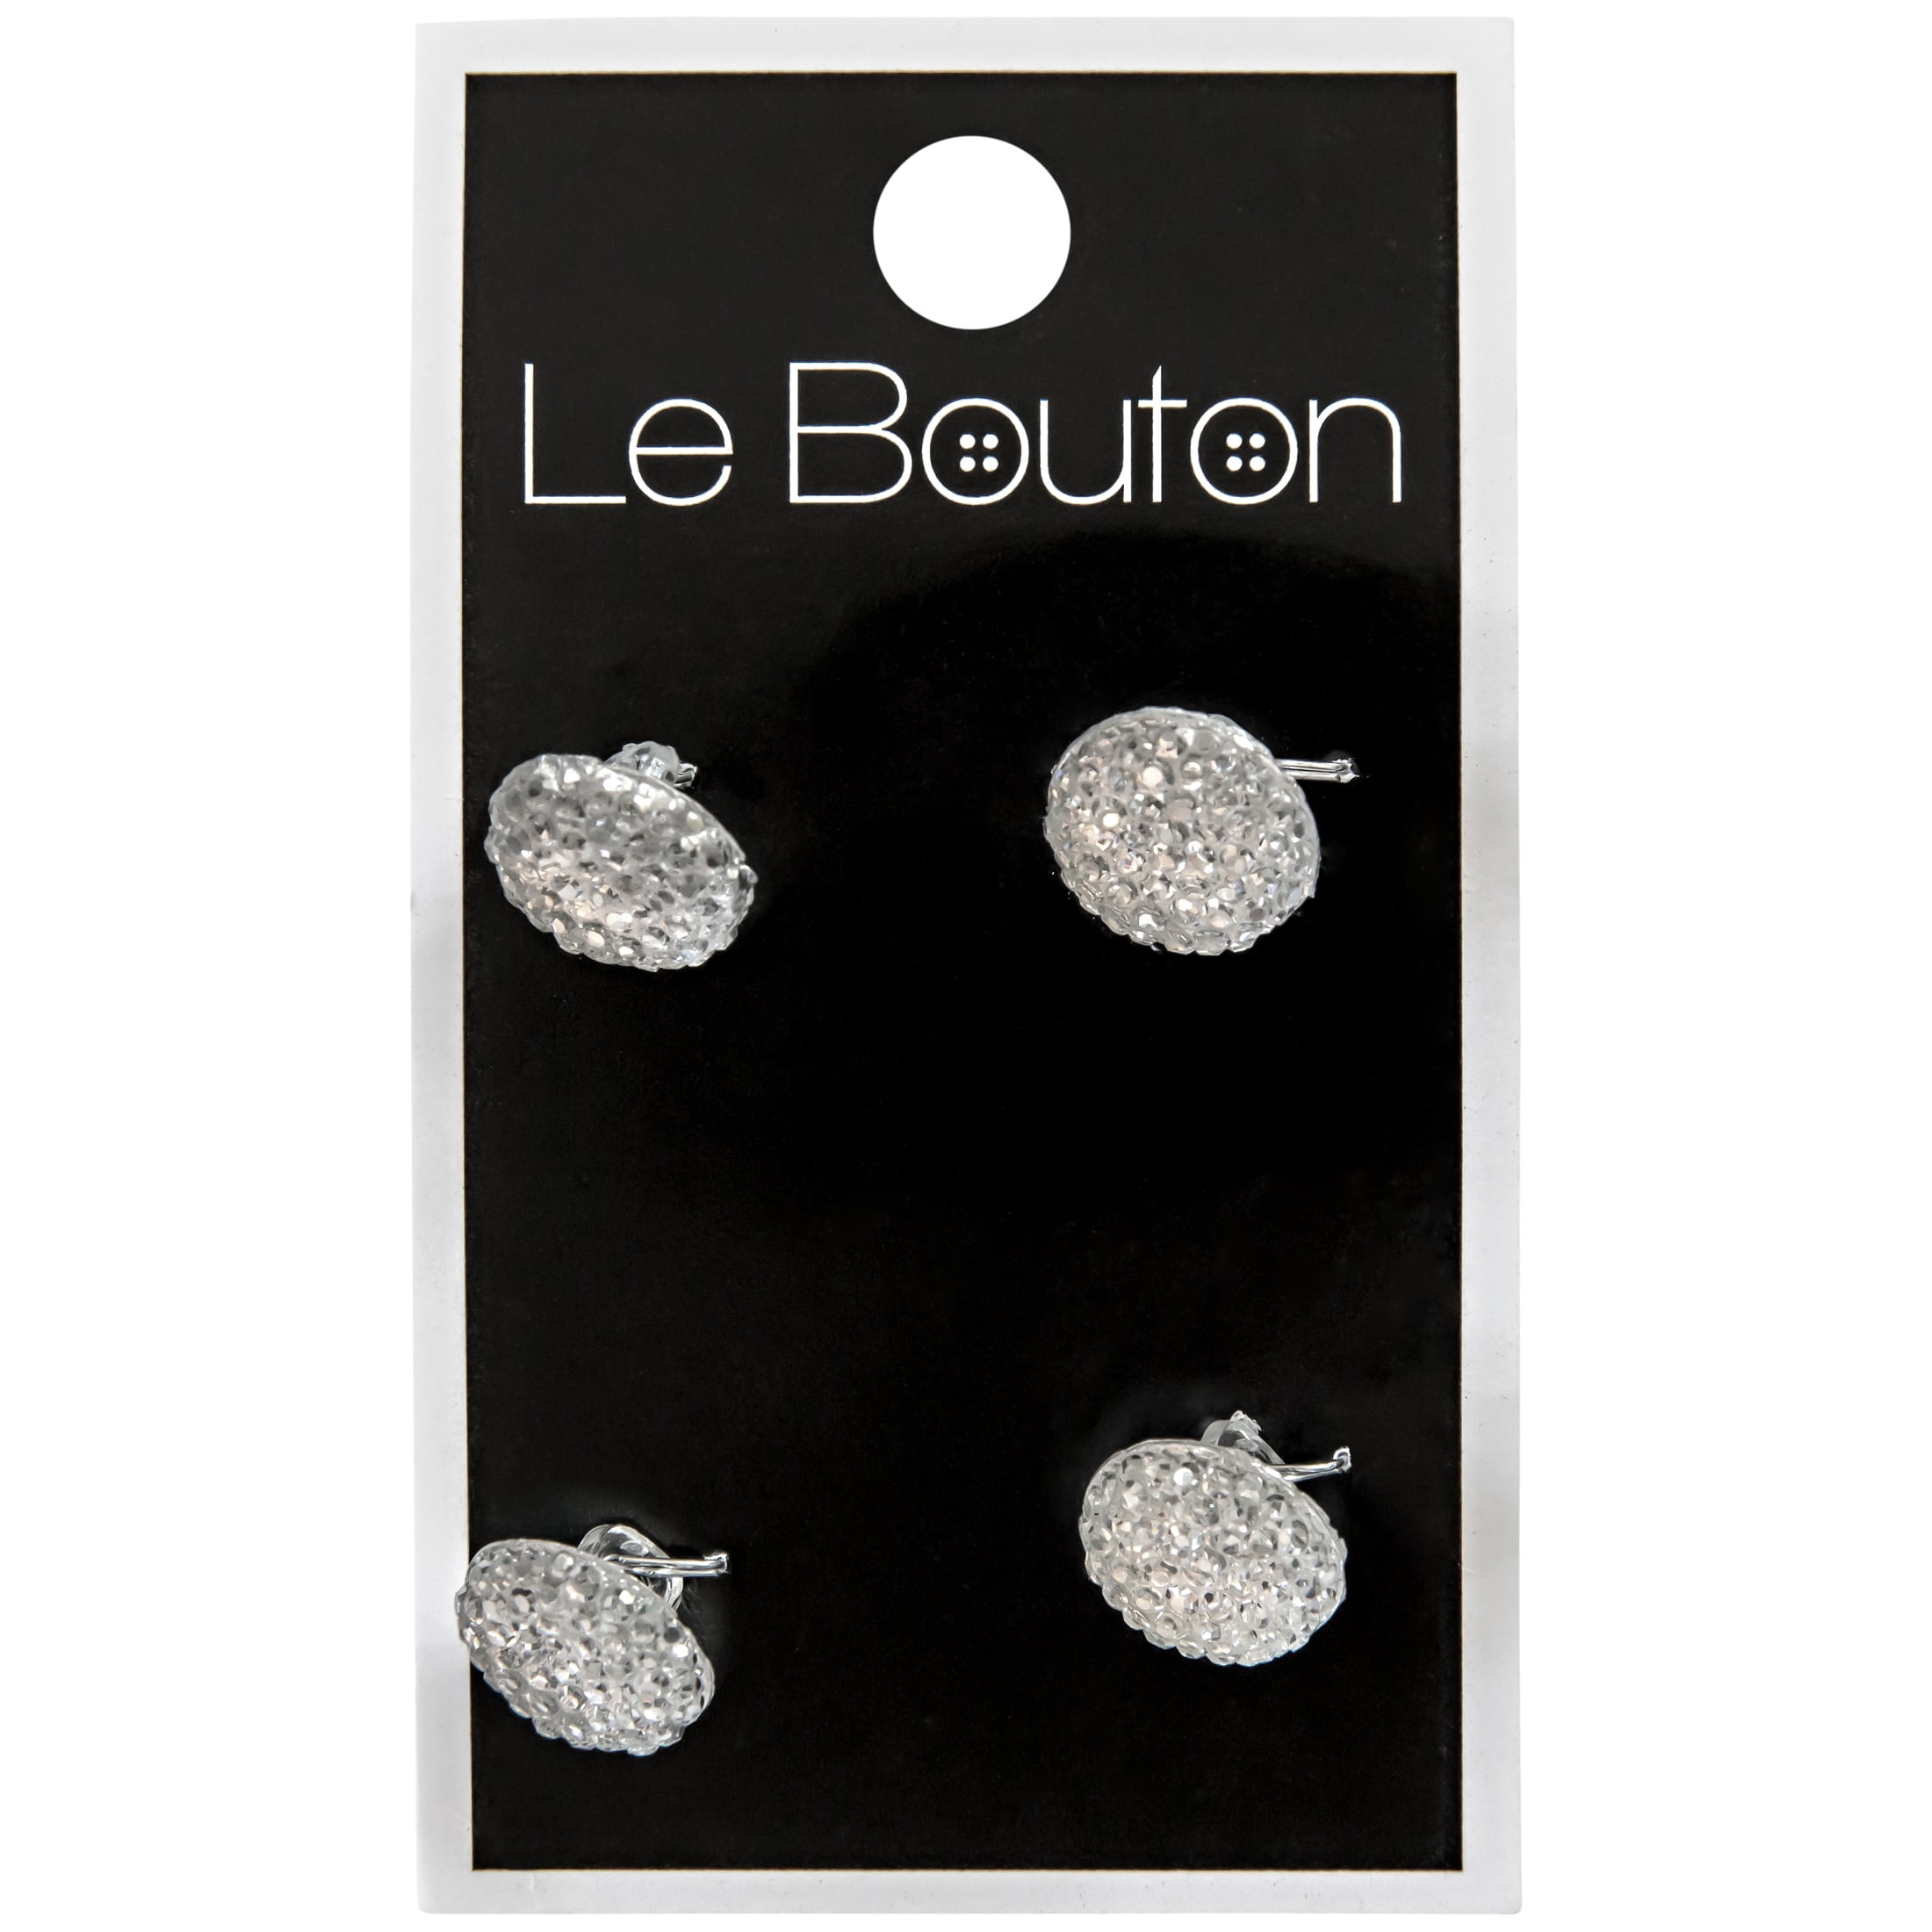 Le Bouton White 1/2" Jelly Shank Buttons, 4 Pieces